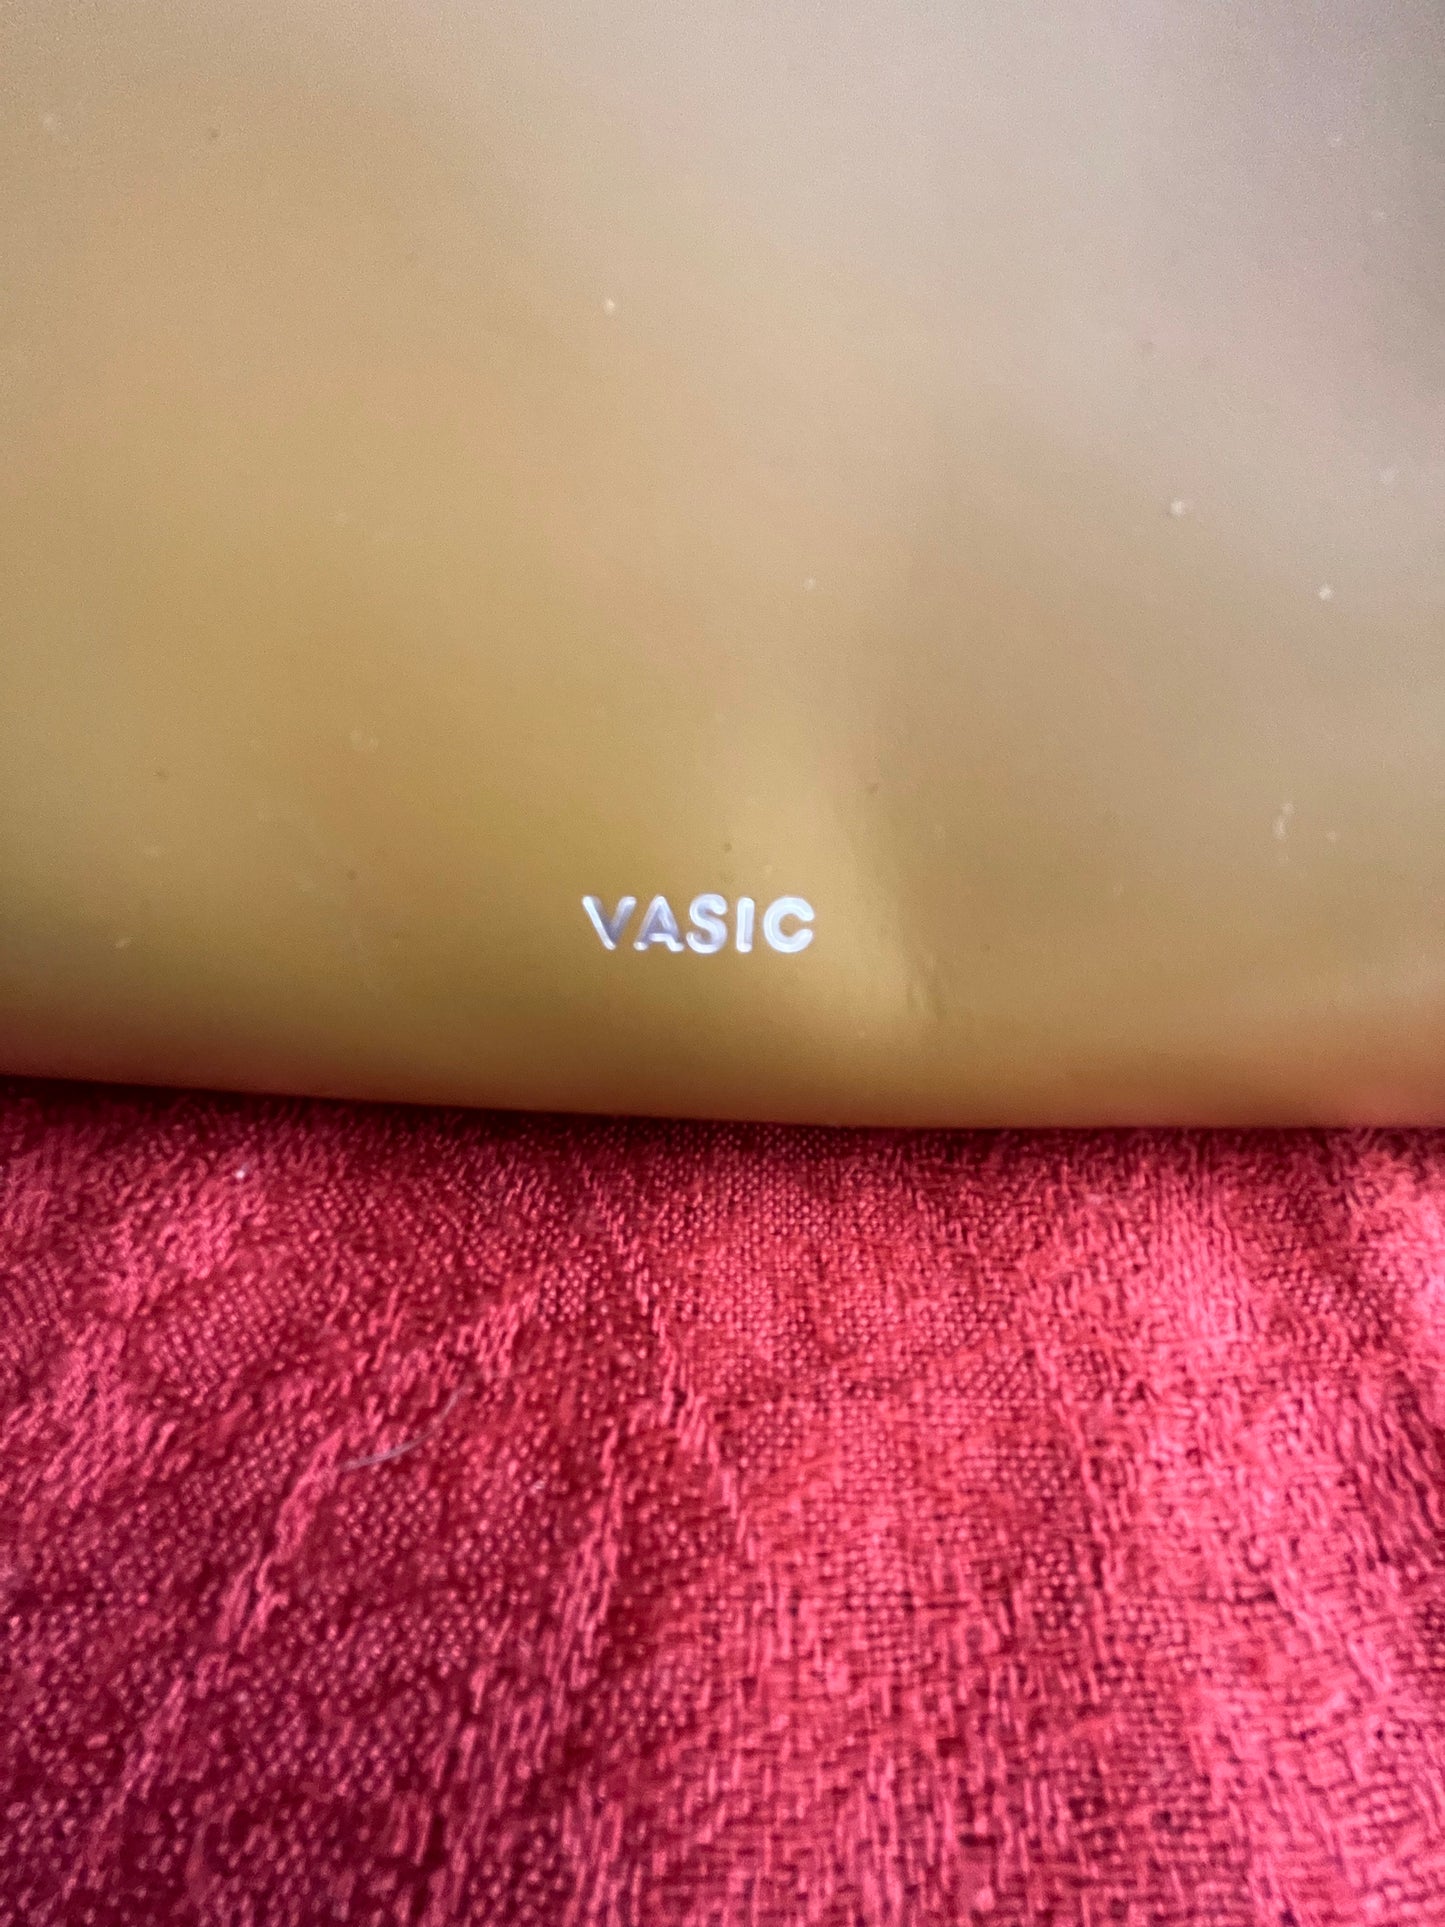 Small Short Handled Leather Bag by Vasic